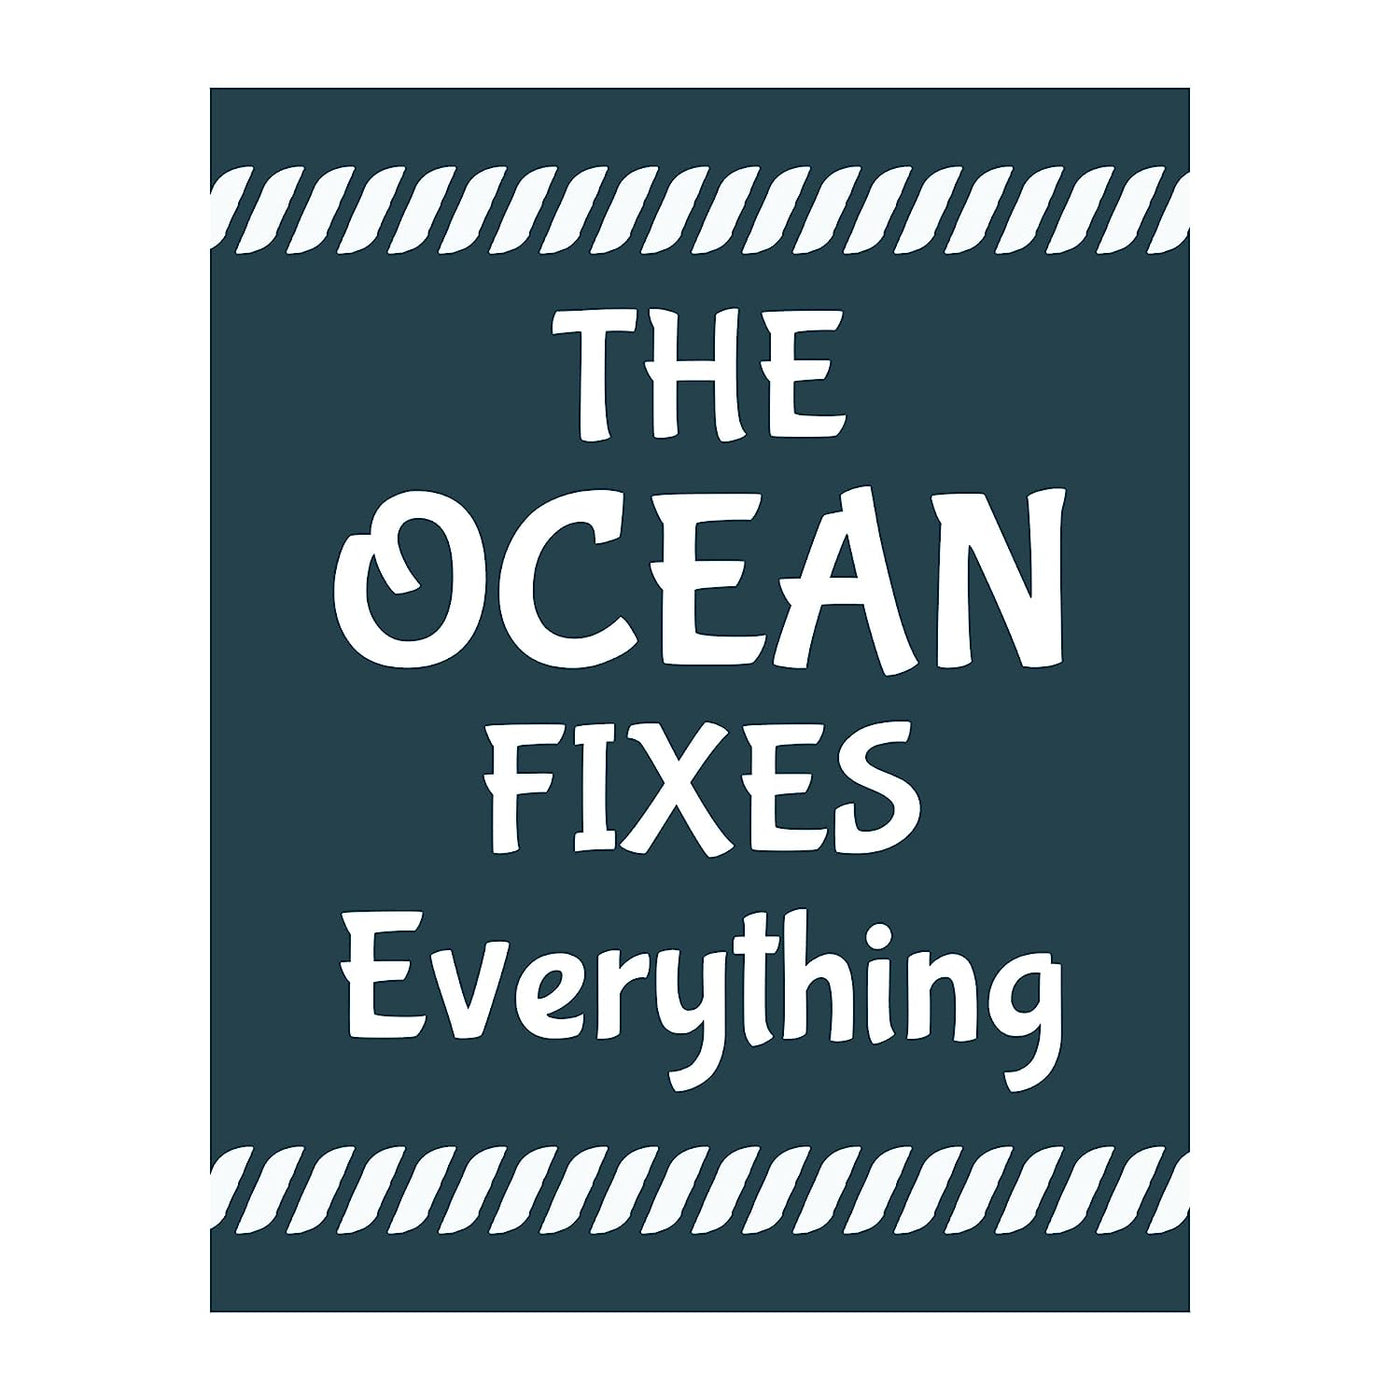 The Ocean Fixes Everything Funny Beach Sign -8 x 10" Nautical Wall Art Print-Ready to Frame. Inspirational Home-Office-Patio-Ocean Themed Decor. Perfect Fun Decoration for the Beach House!